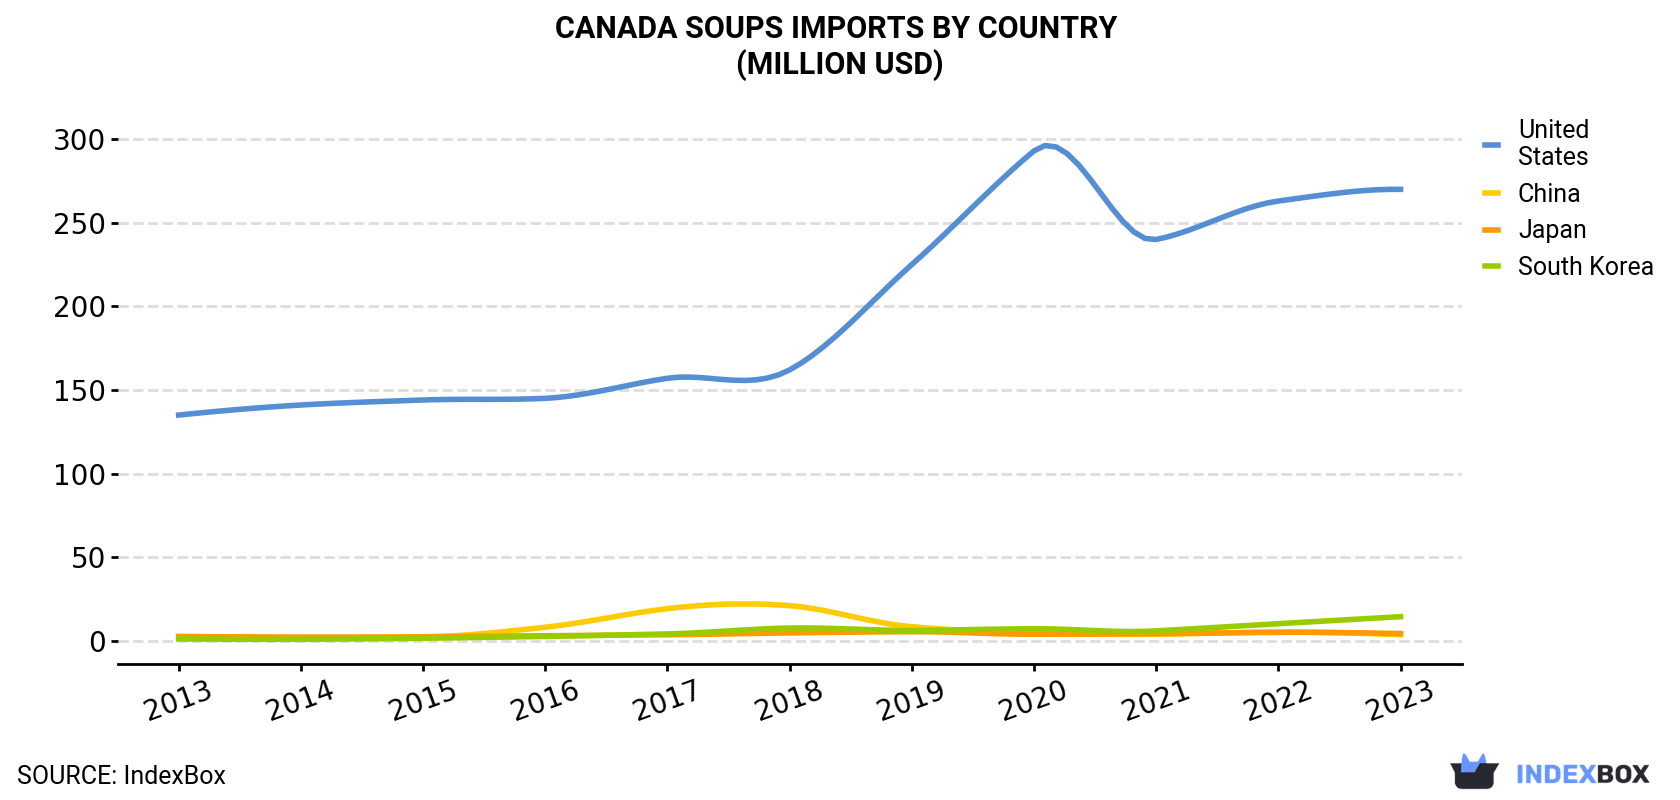 Canada Soups Imports By Country (Million USD)